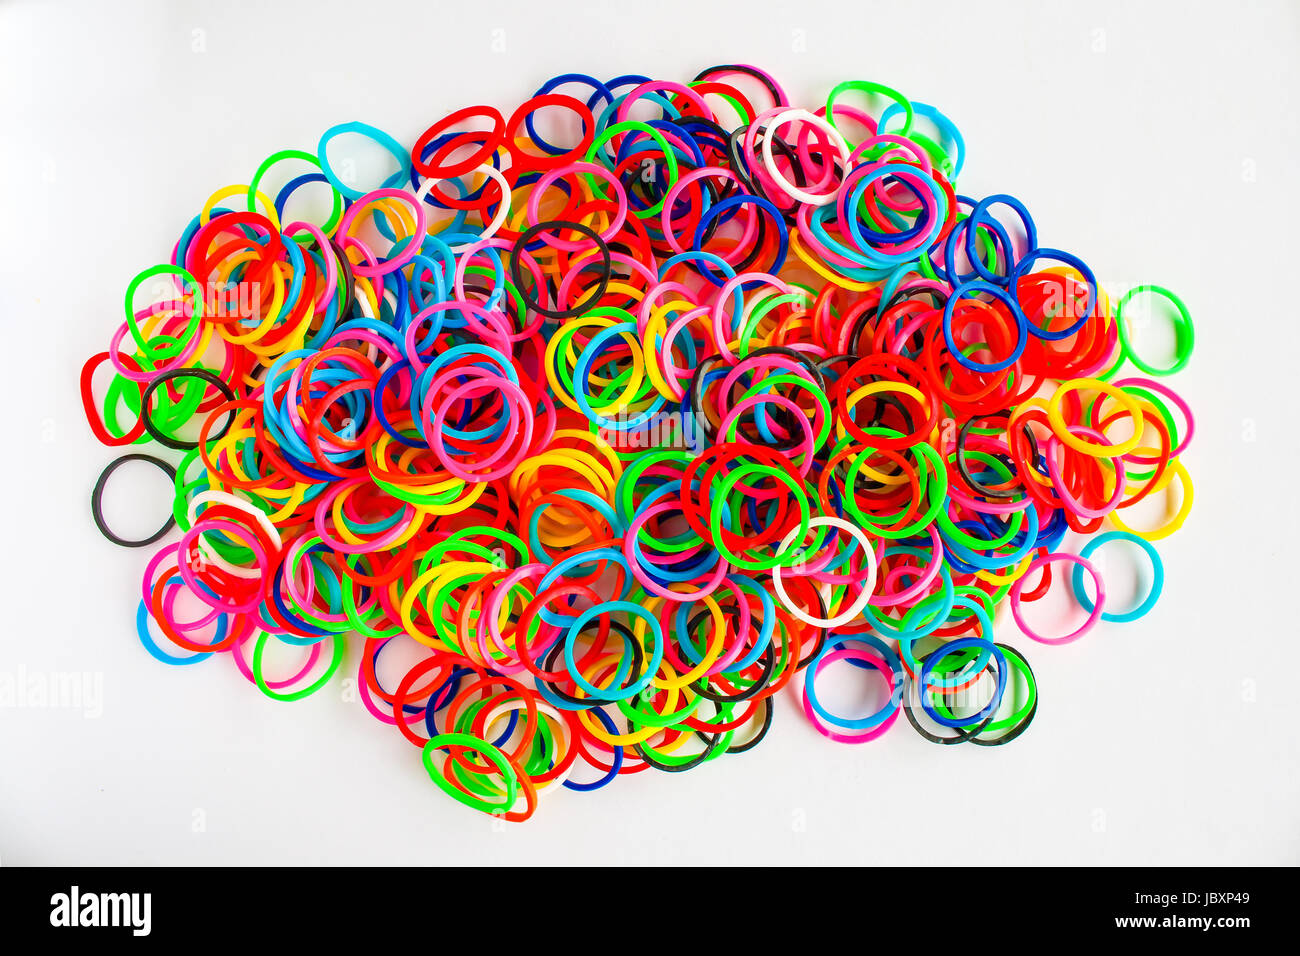 Colorful Rainbow Loom Bracelet Rubber Bands Stock Photo 225478291